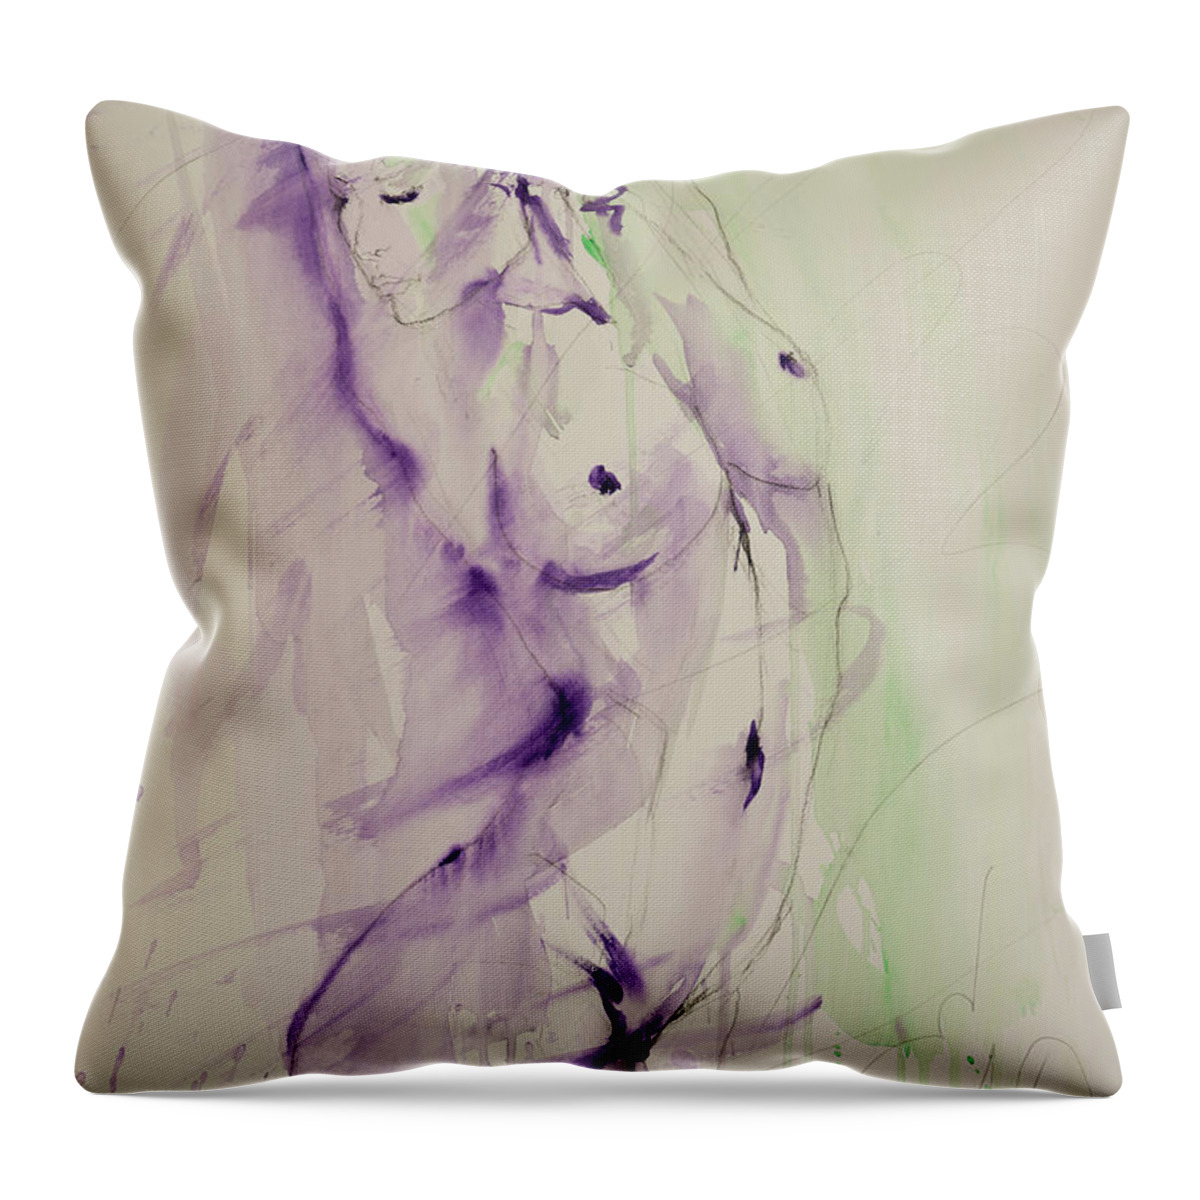 Female Throw Pillow featuring the painting Nude 3 #2 by Elizabeth Parashis